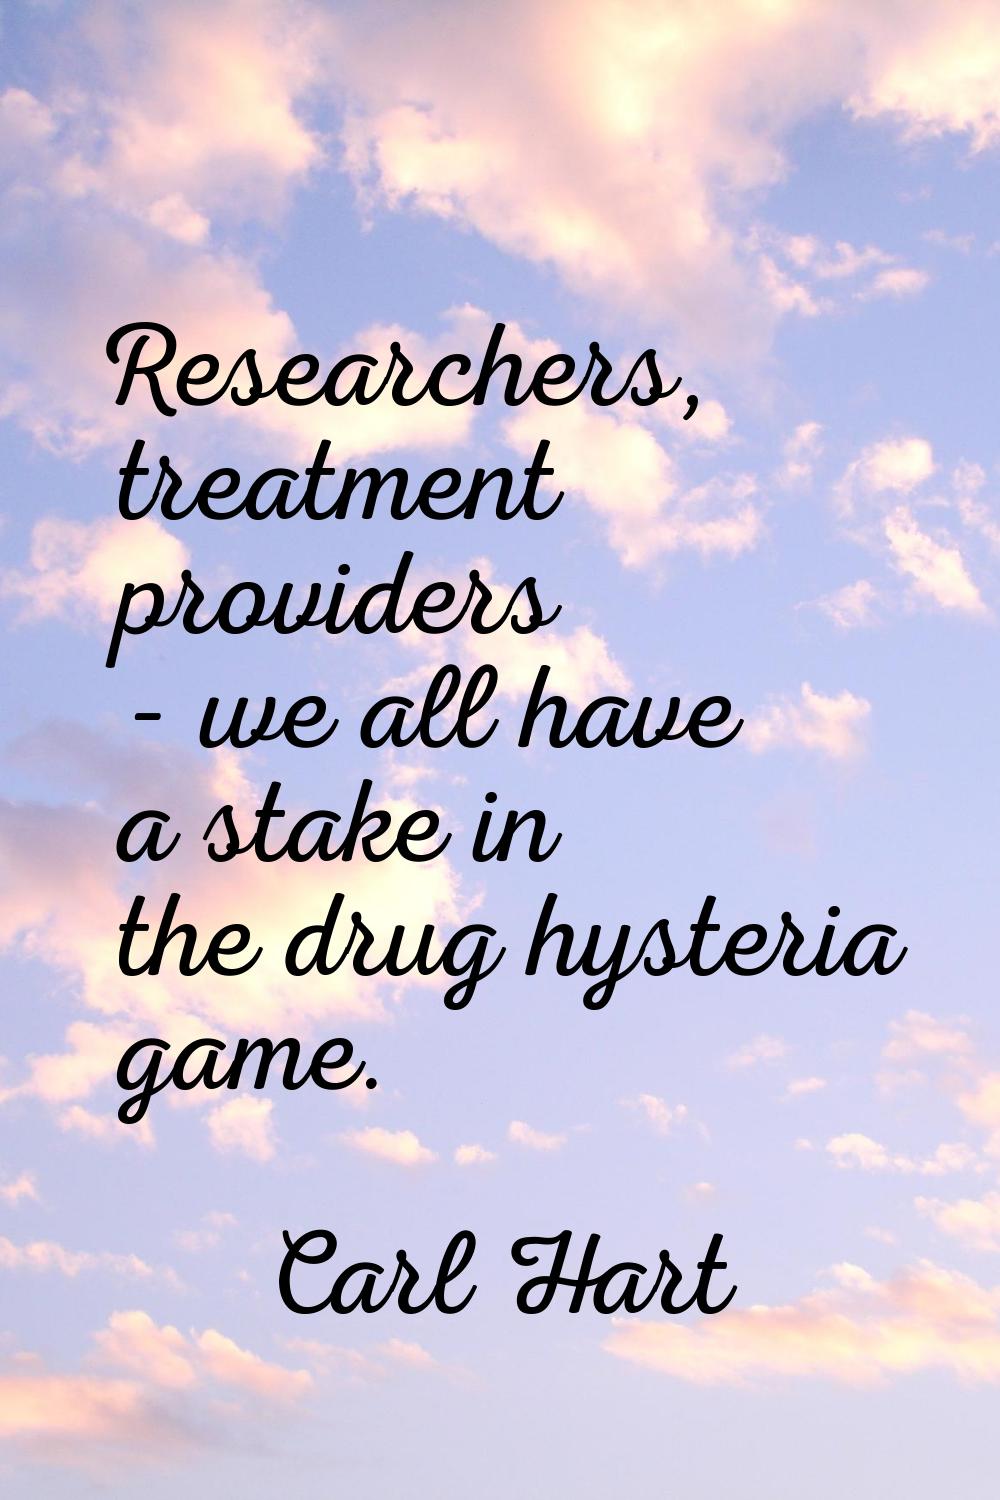 Researchers, treatment providers - we all have a stake in the drug hysteria game.